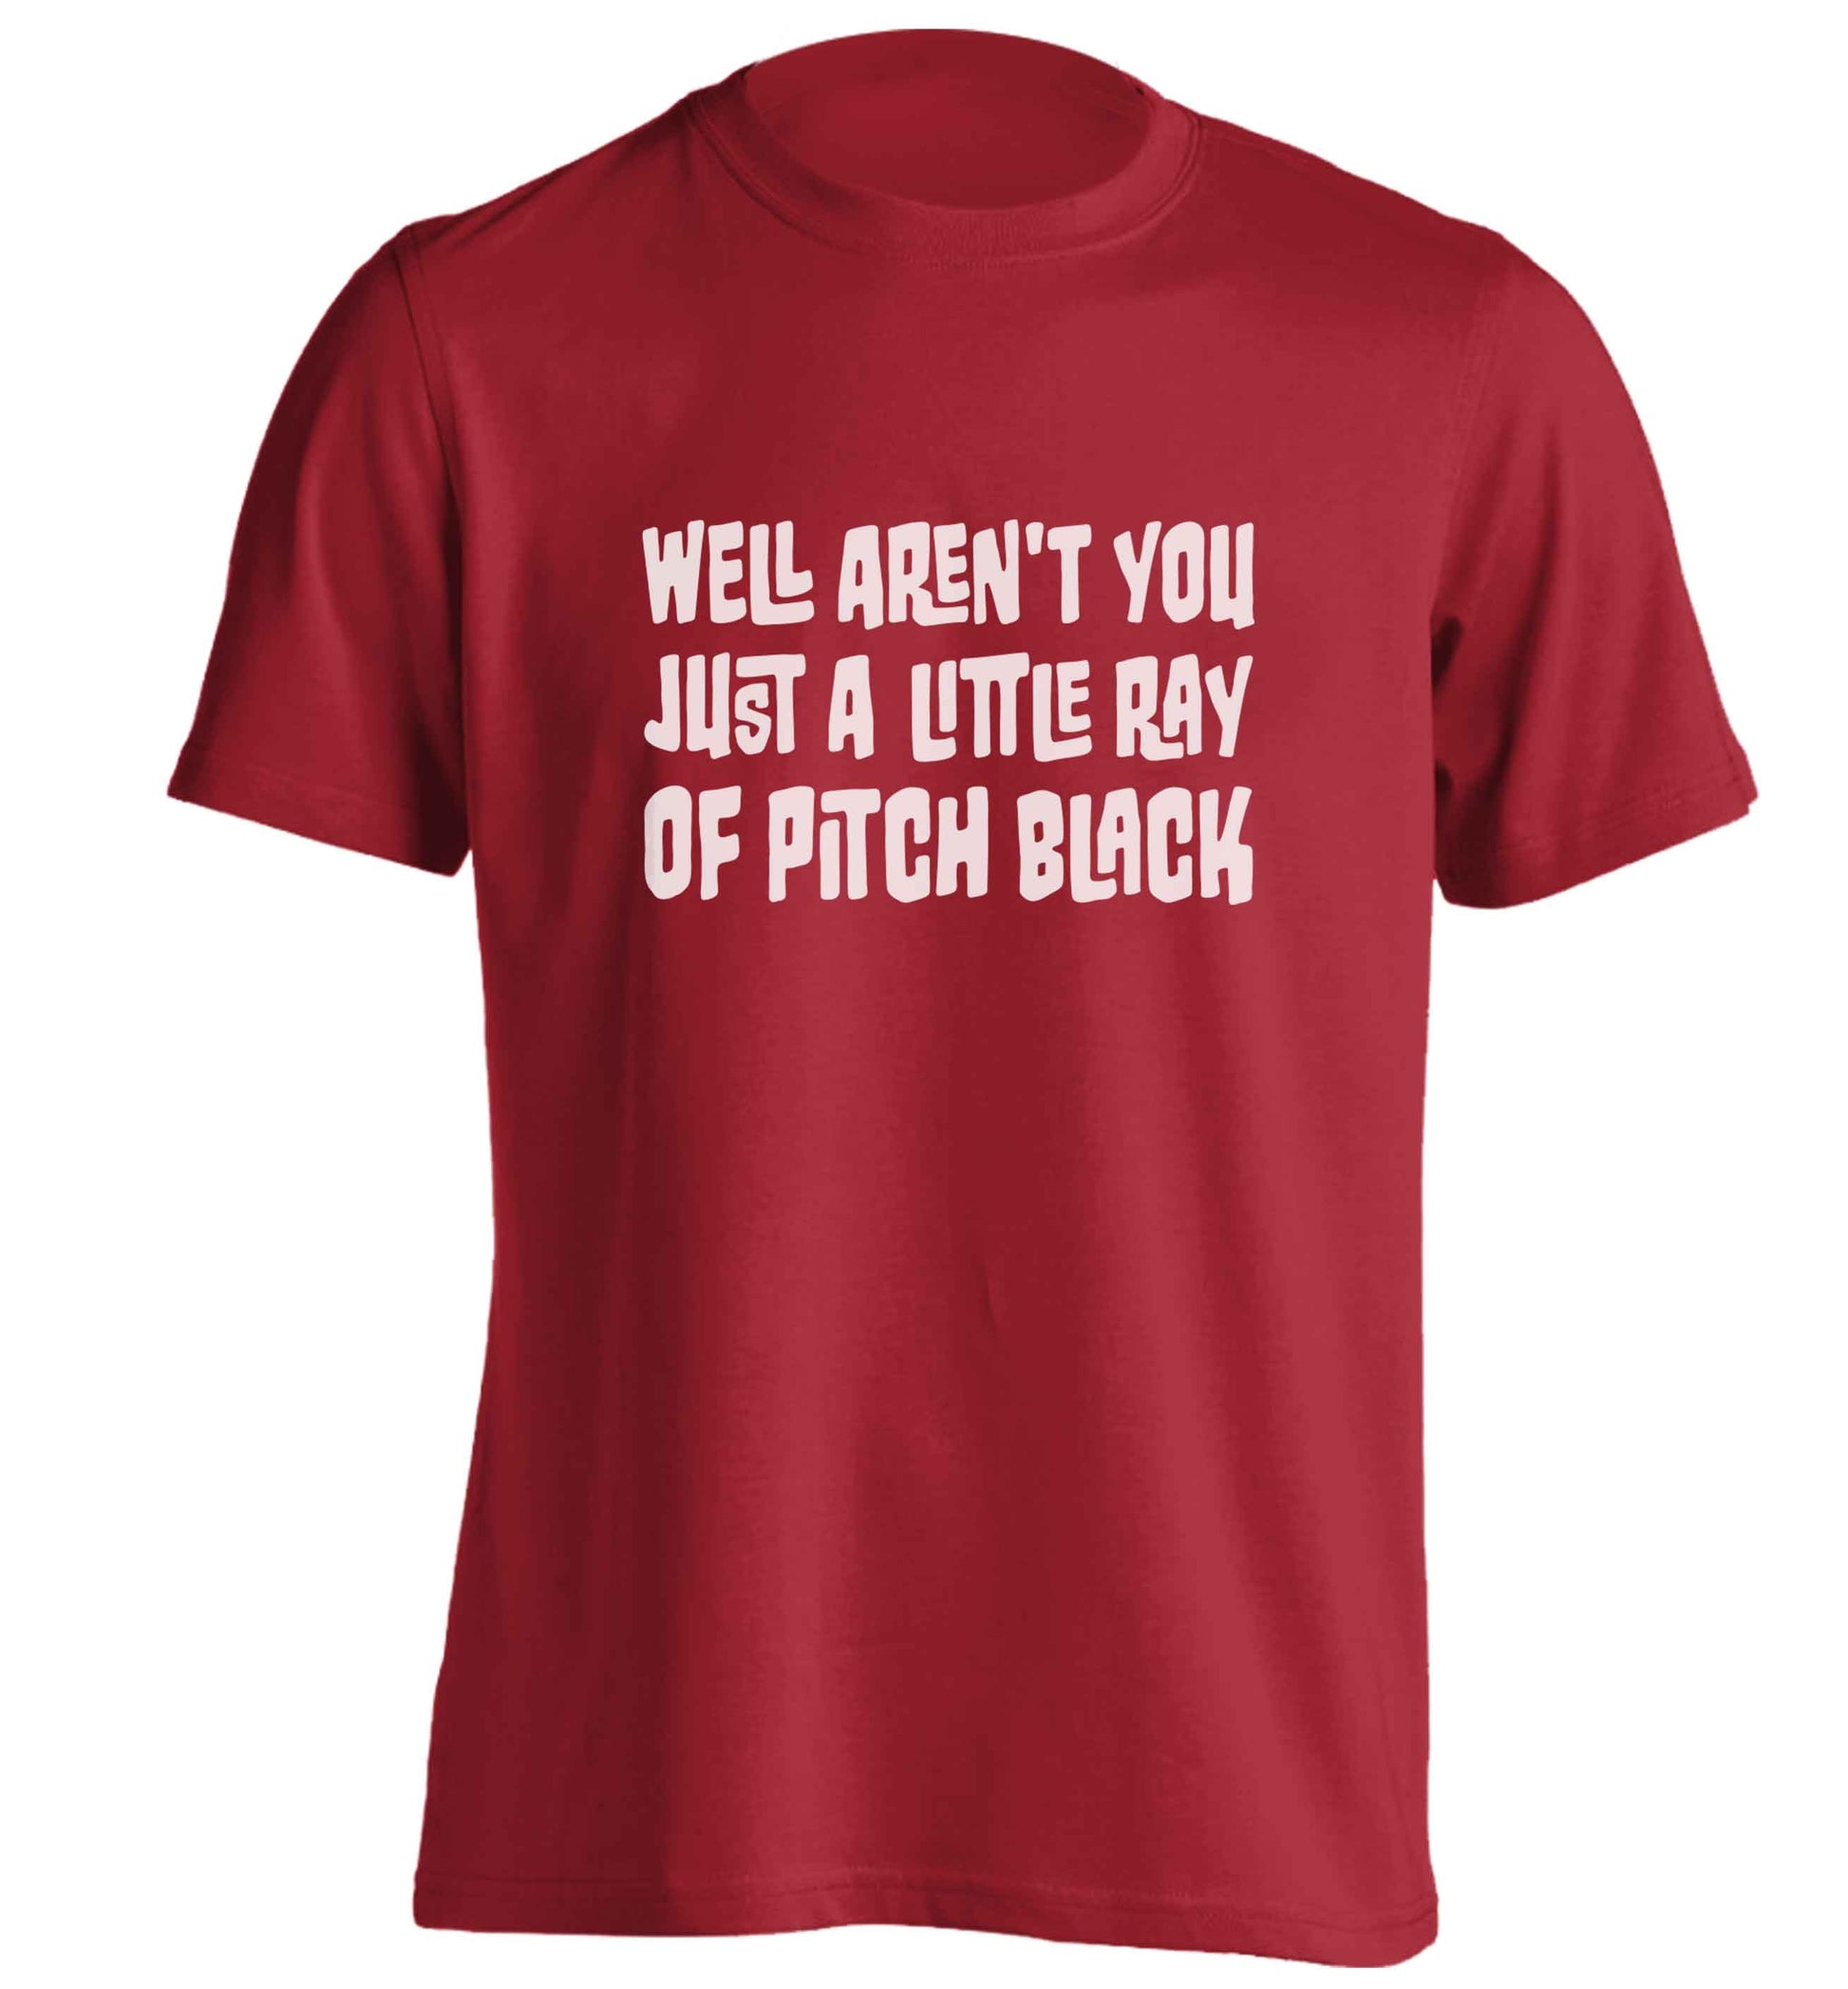 Well aren't you just a little ray of pitch black Kit adults unisex red Tshirt 2XL